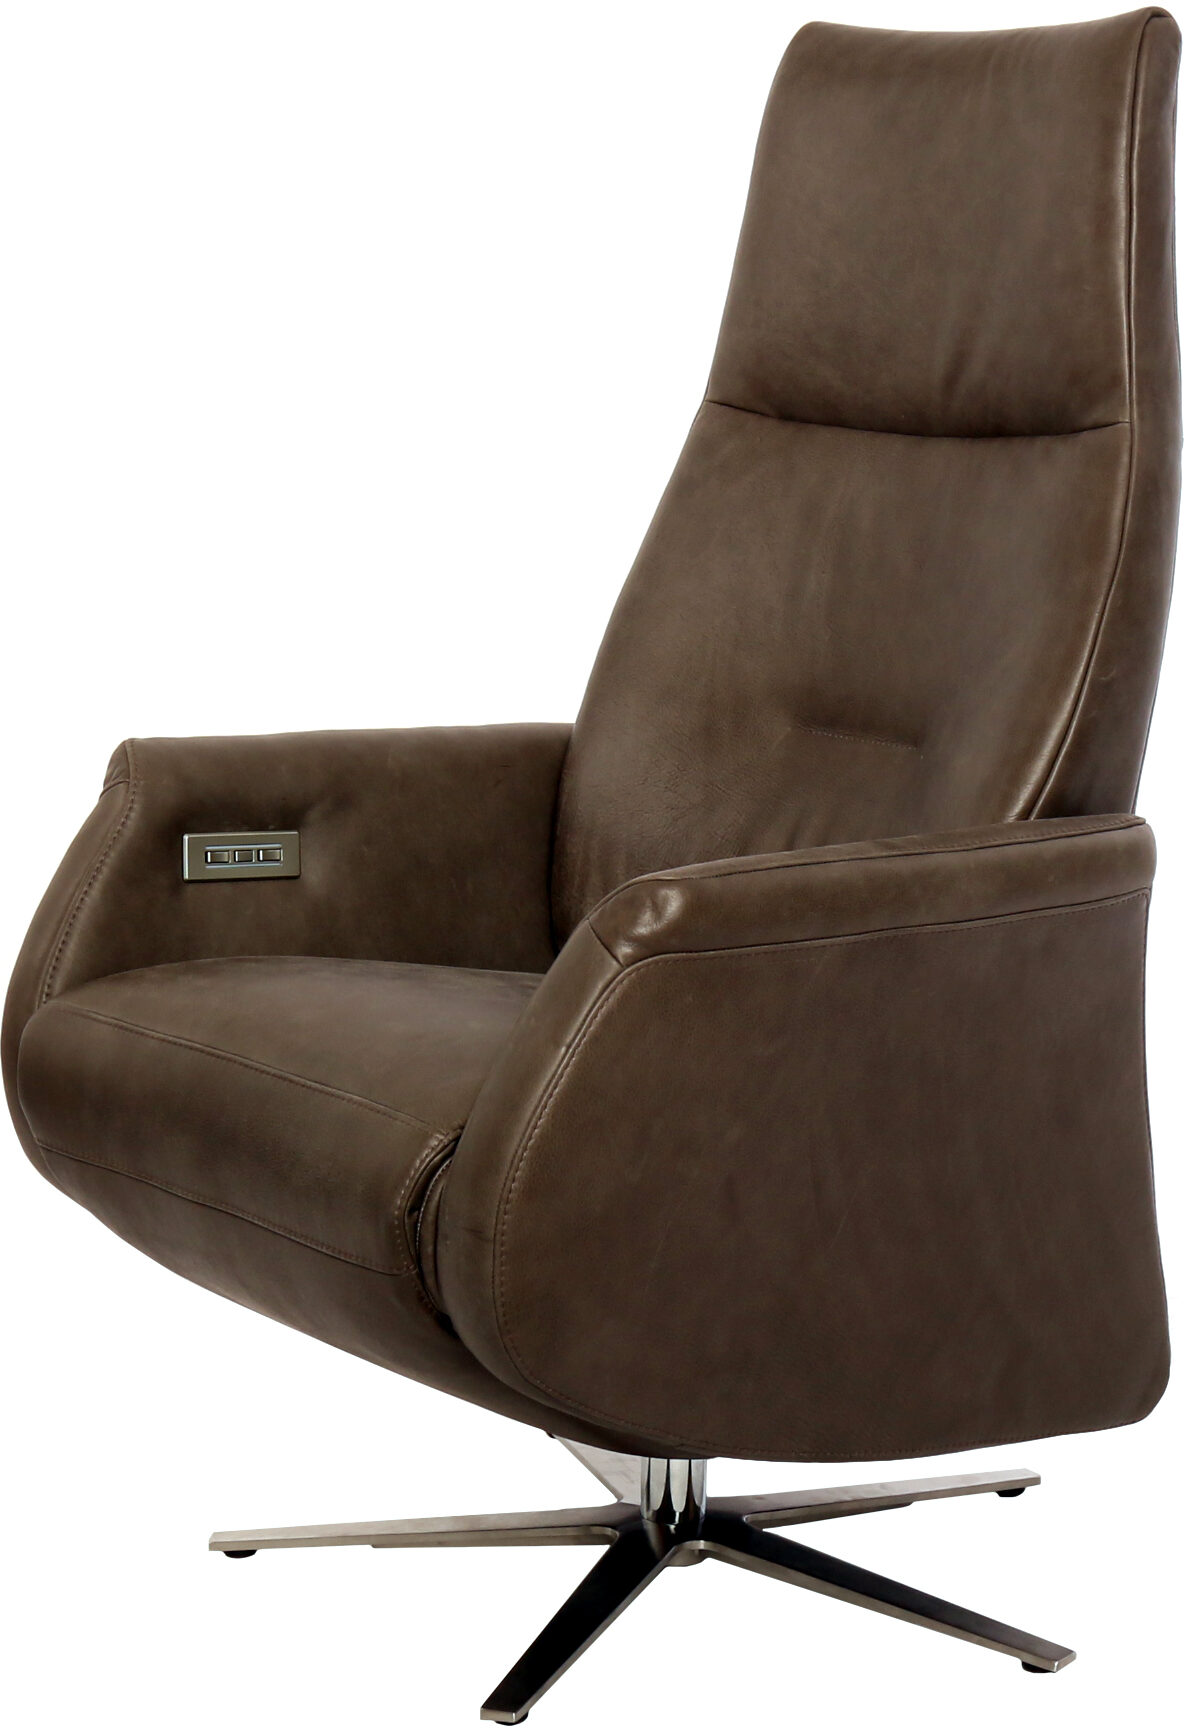 Twinz 603 relaxfauteuil